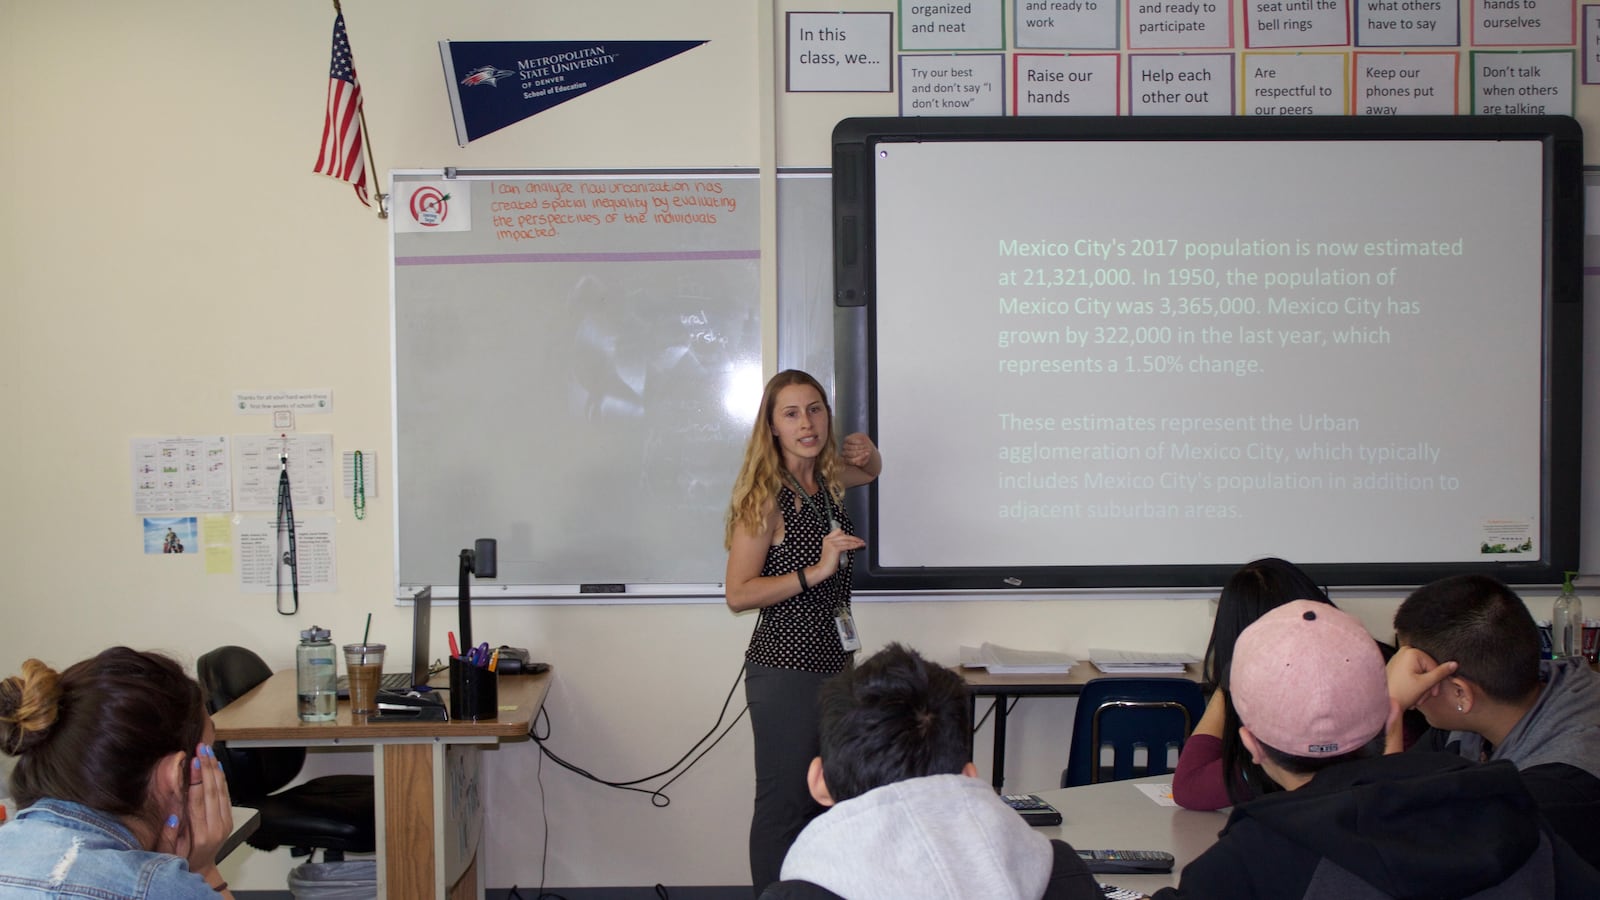 A social studies teacher gives a class to freshman at Aurora Central High School in April 2017. (Photo by Yesenia Robles, Chalkbeat)